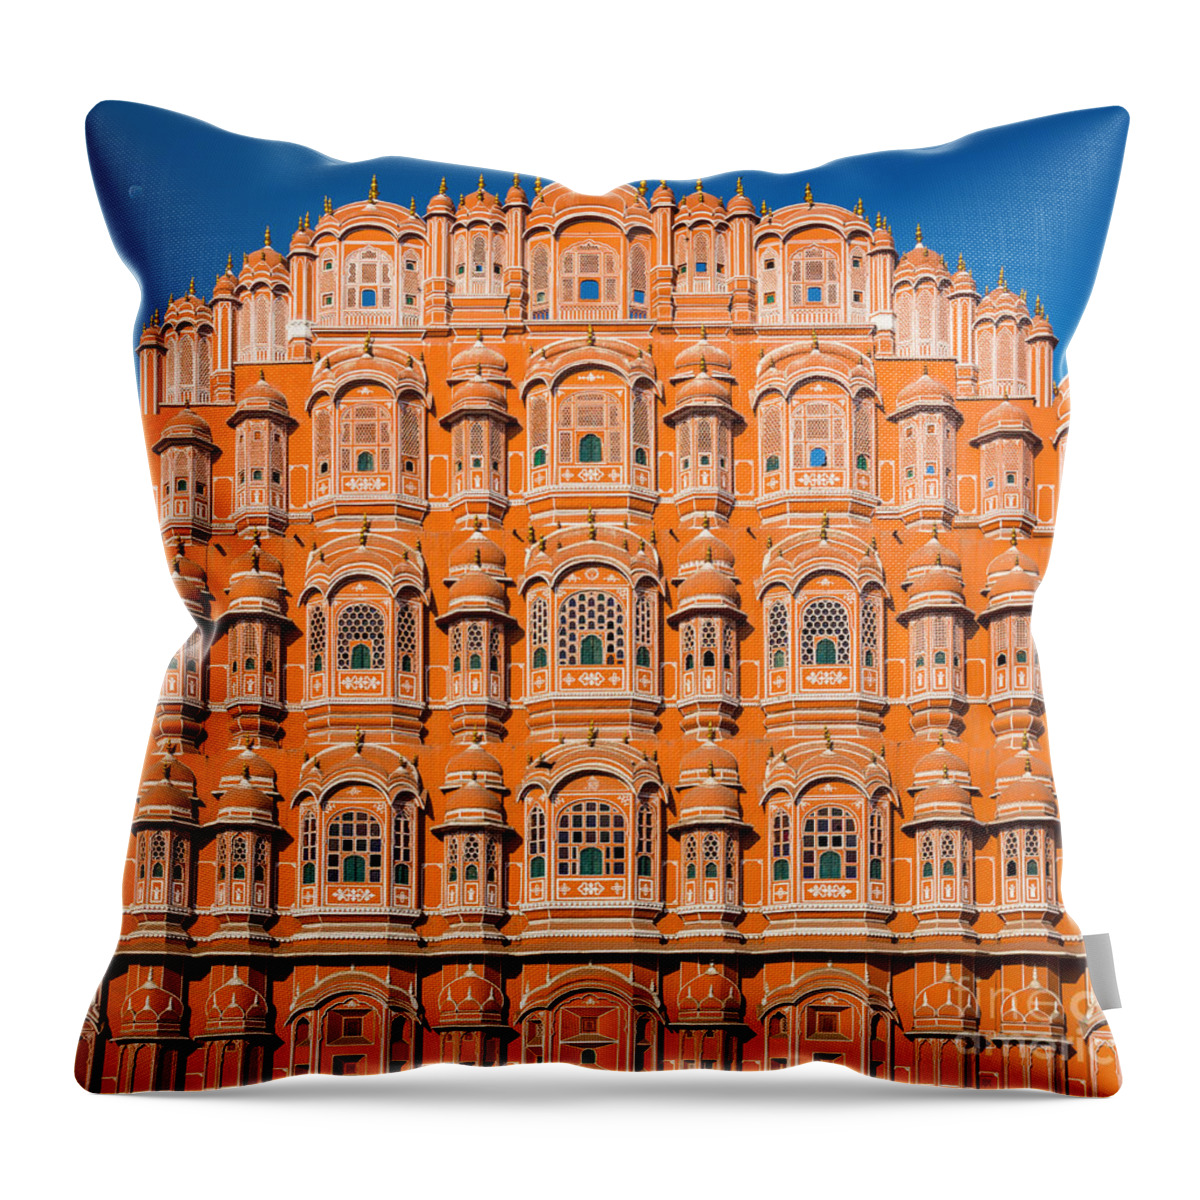 Asia Throw Pillow featuring the photograph Hawa Mahal Moon by Inge Johnsson